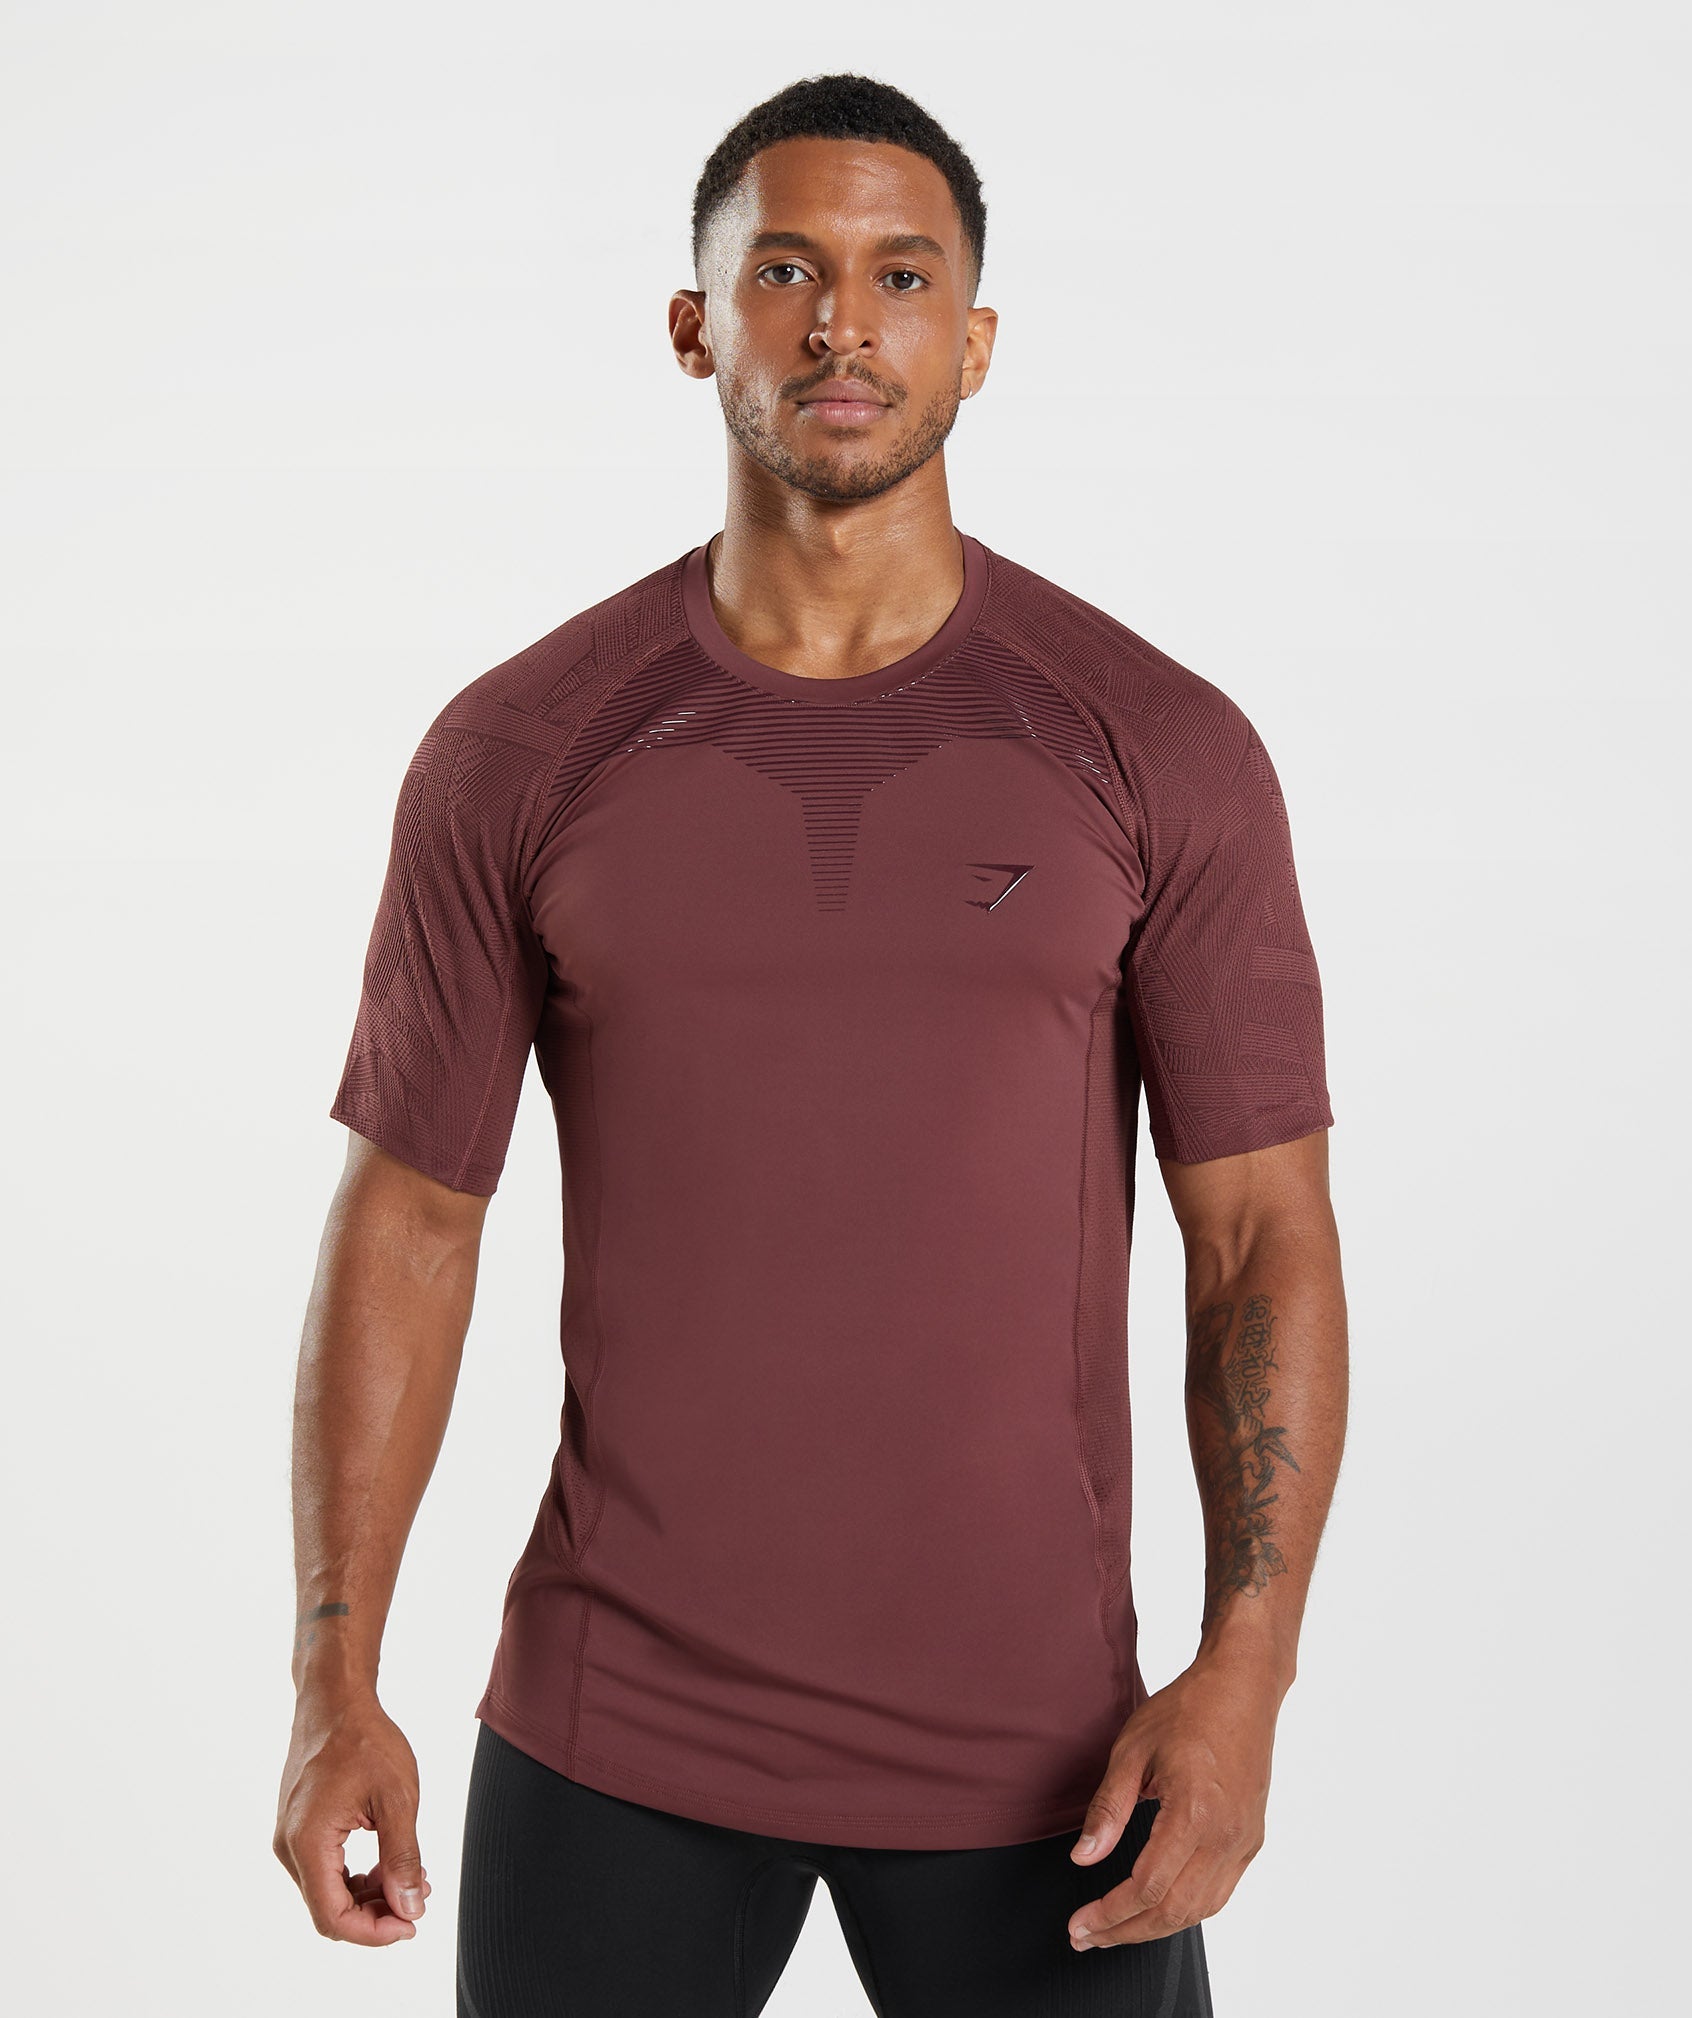 Form T-Shirt in Cherry Brown - view 1